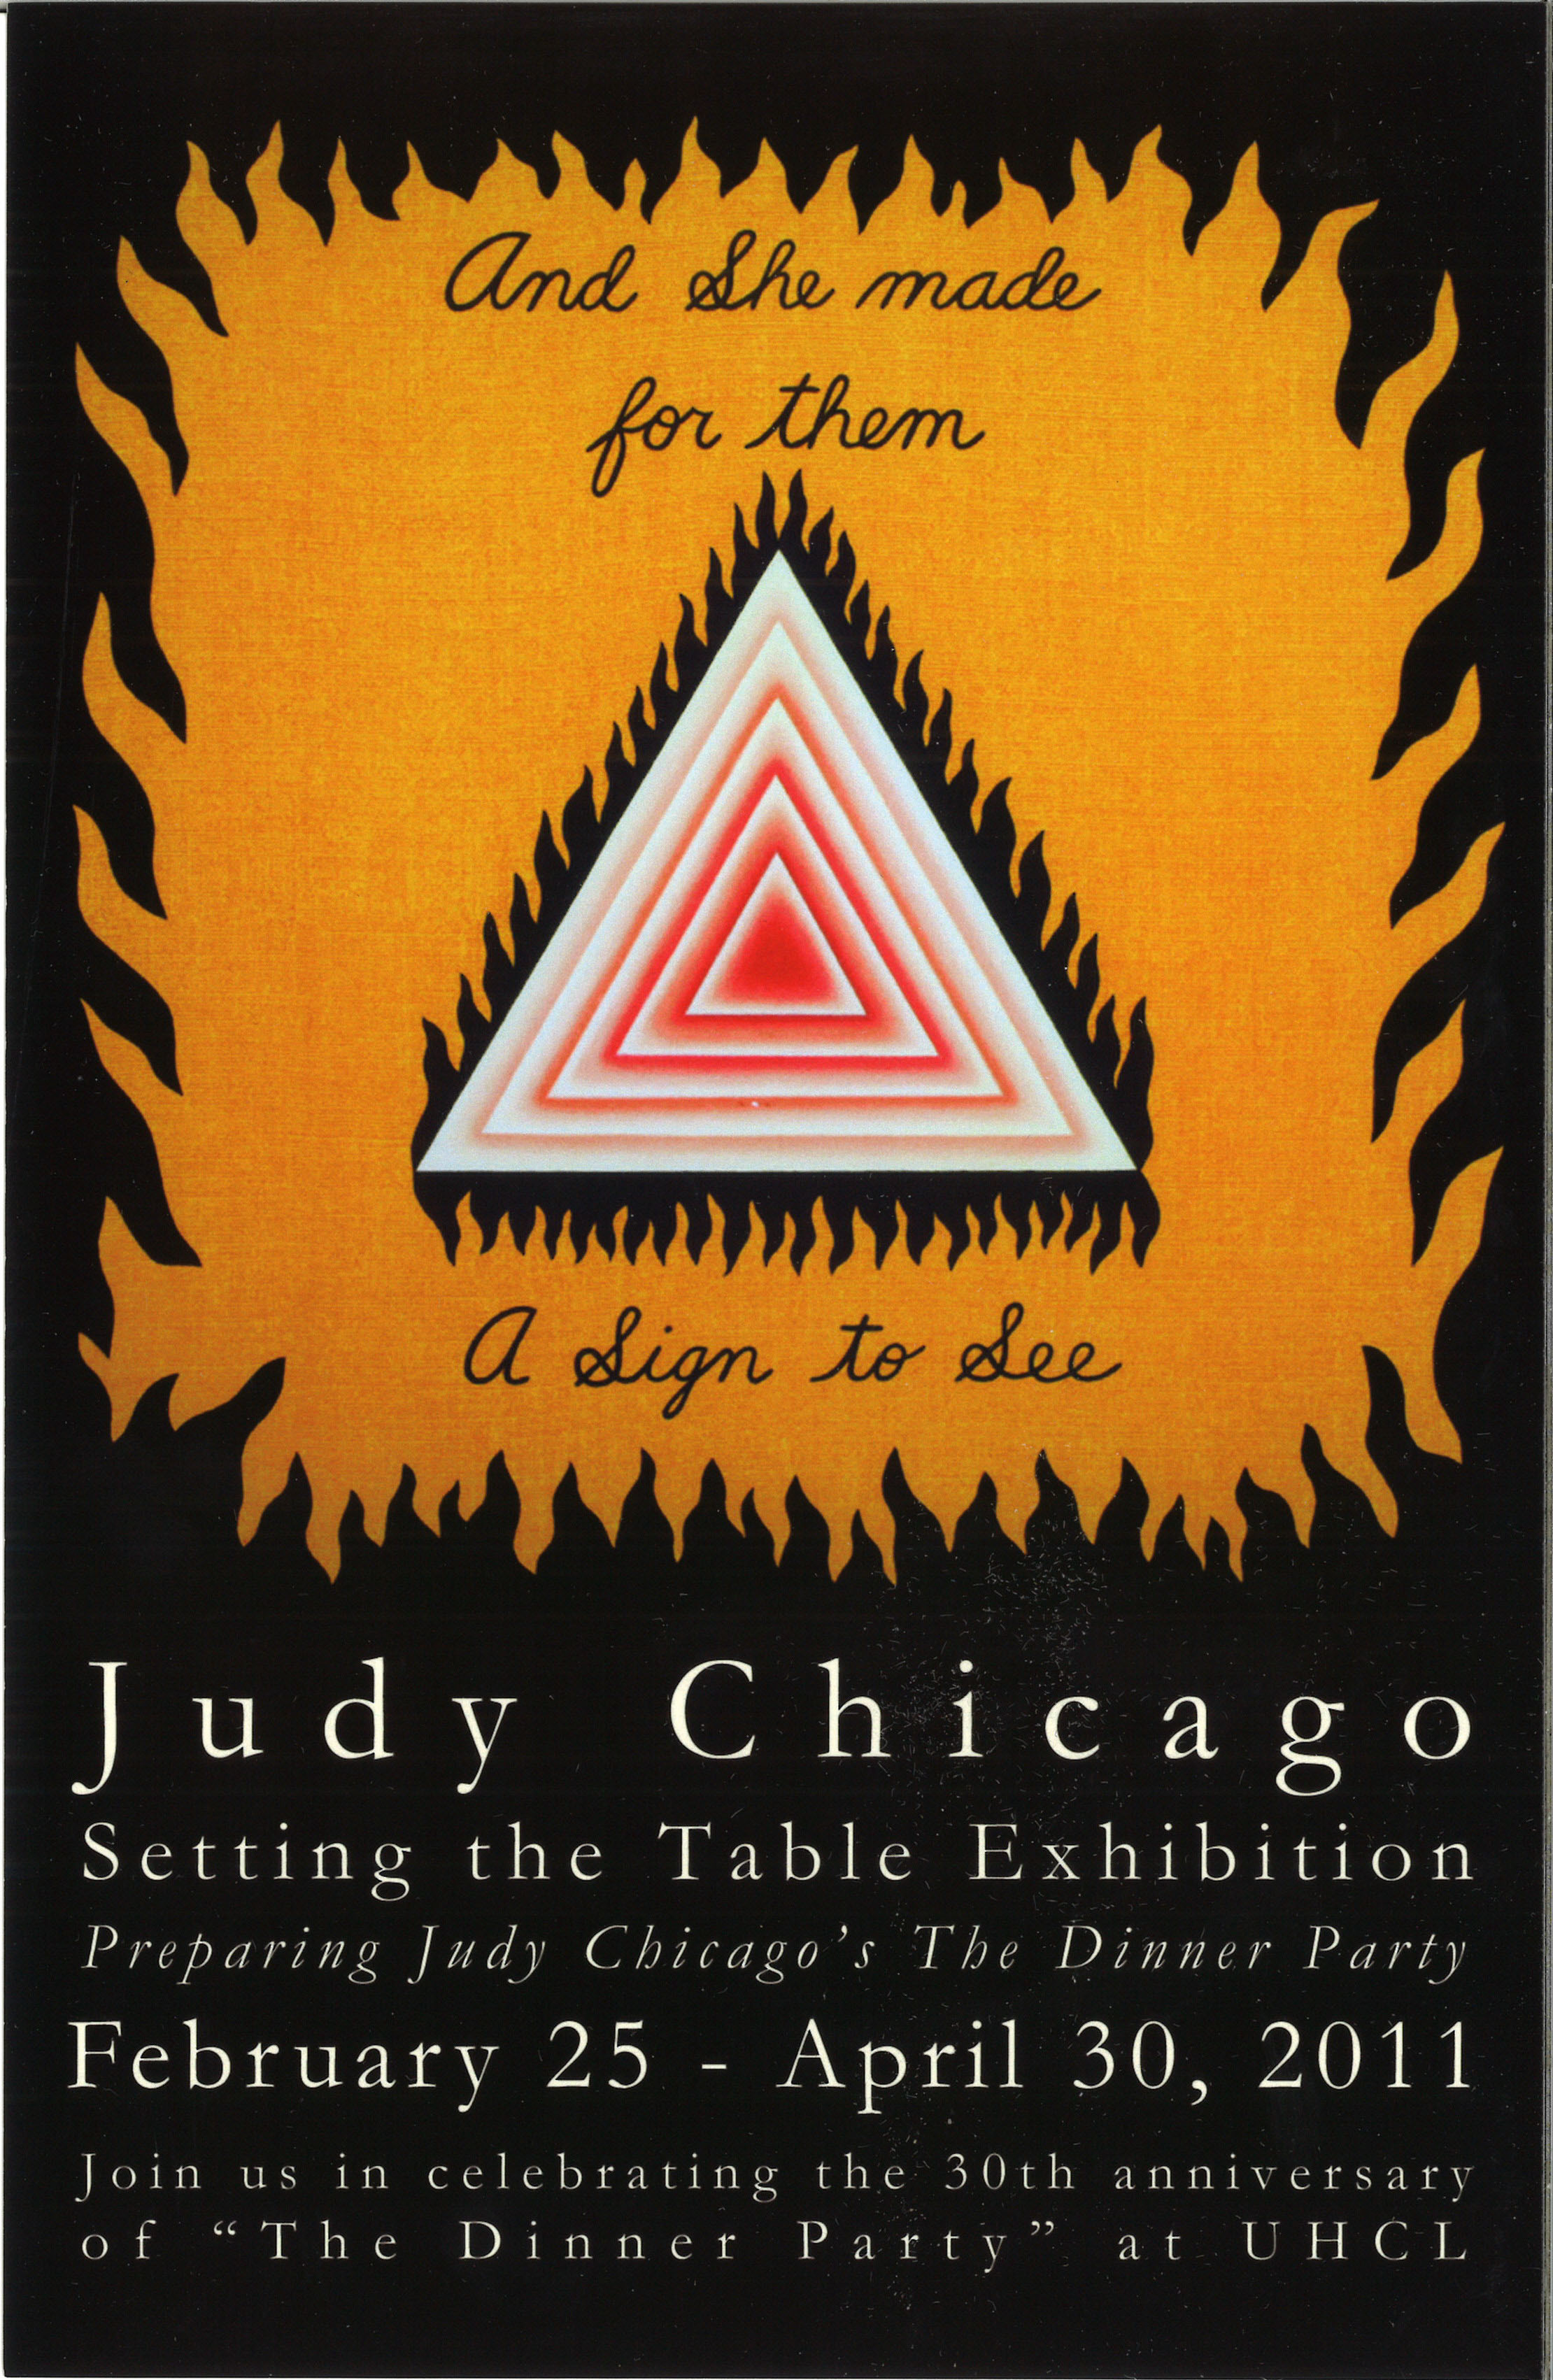 PHOTO: Flyer for UHCL's 30th anniversary celebration of the Judy Chicago exhibit that came to UHCL in 1981.